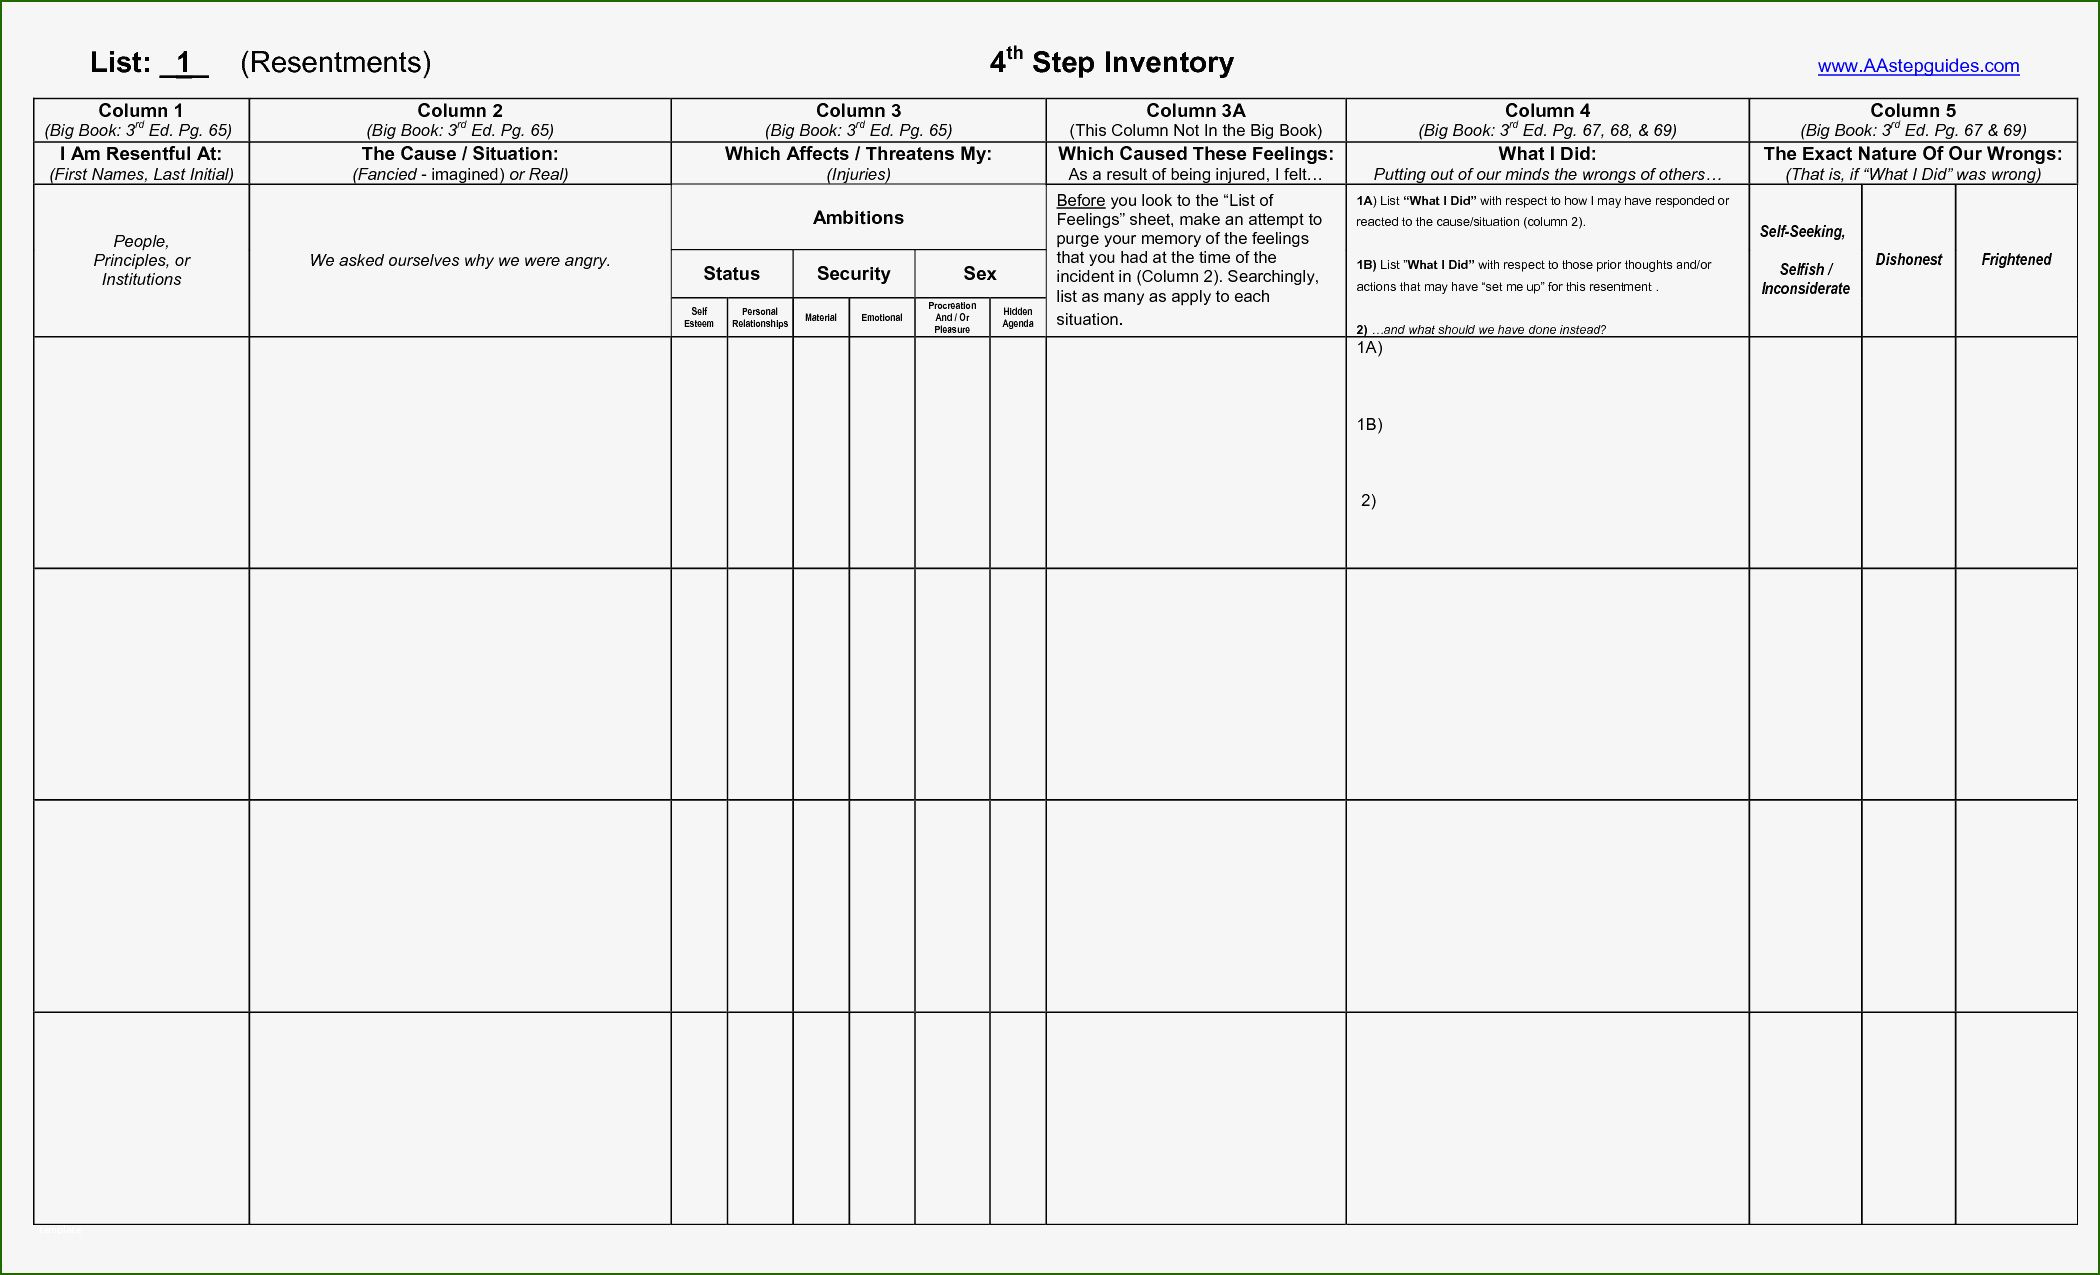 4th Step Inventory Template 12 Scheme You 39 ll Want To Copy Immediately 